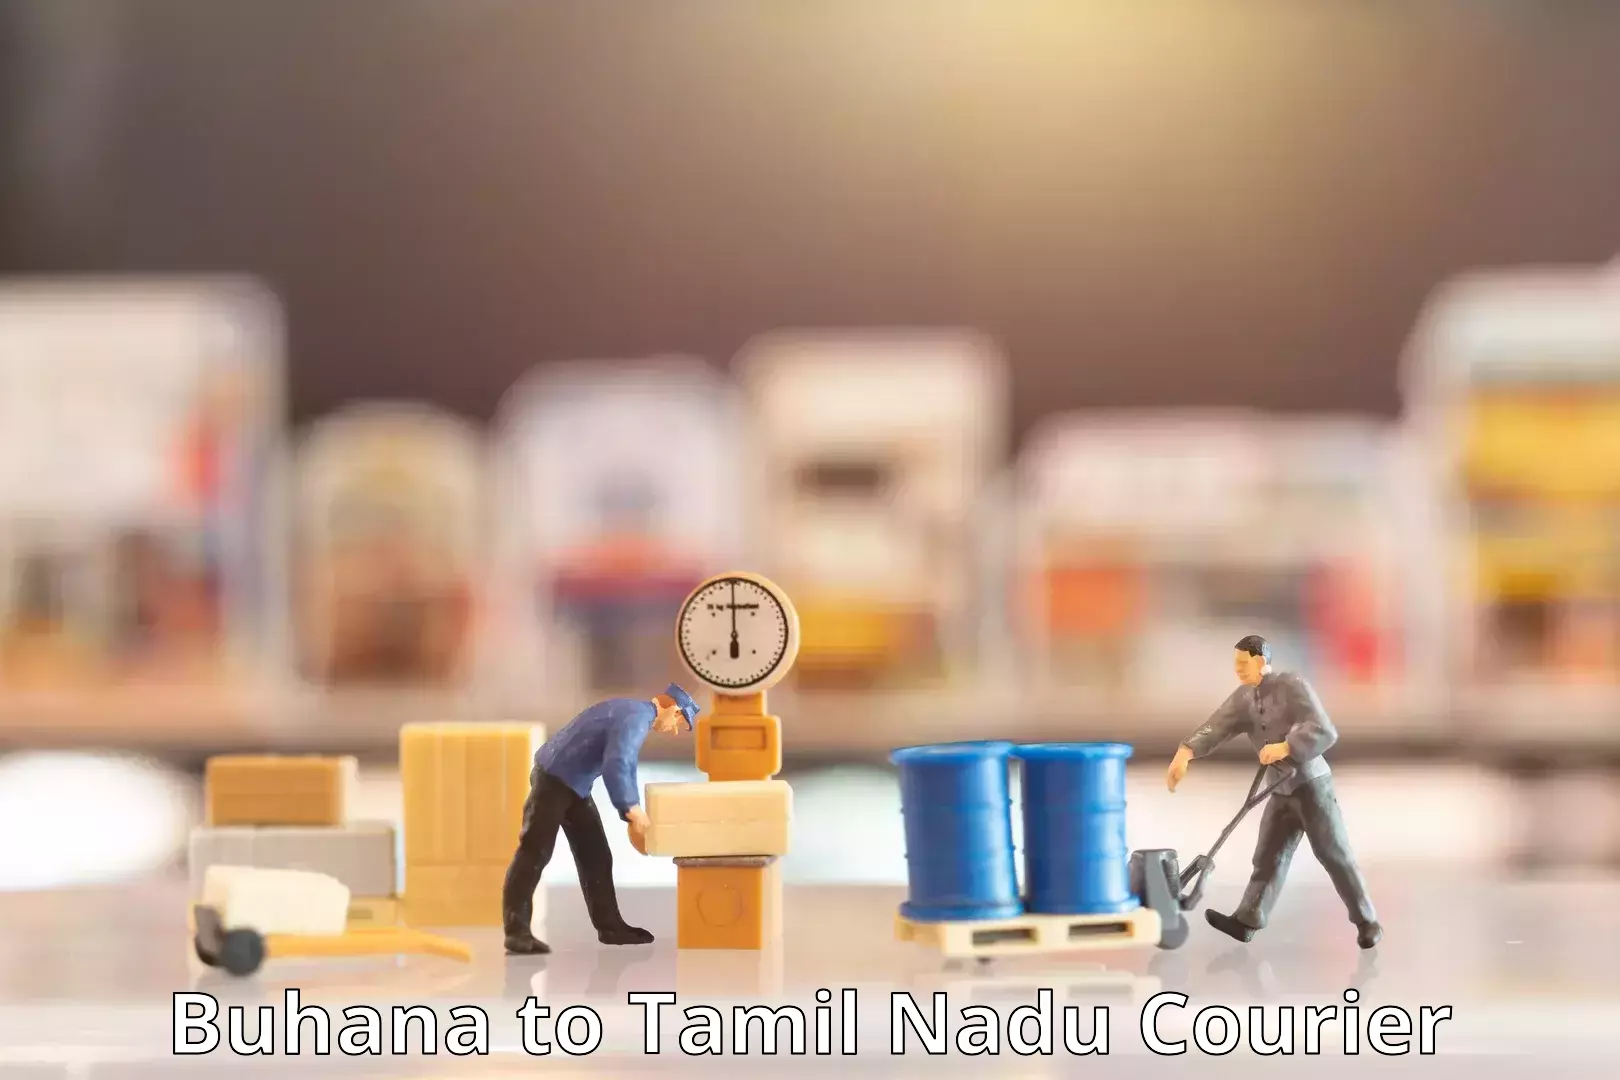 Personal courier services Buhana to Tamil Nadu